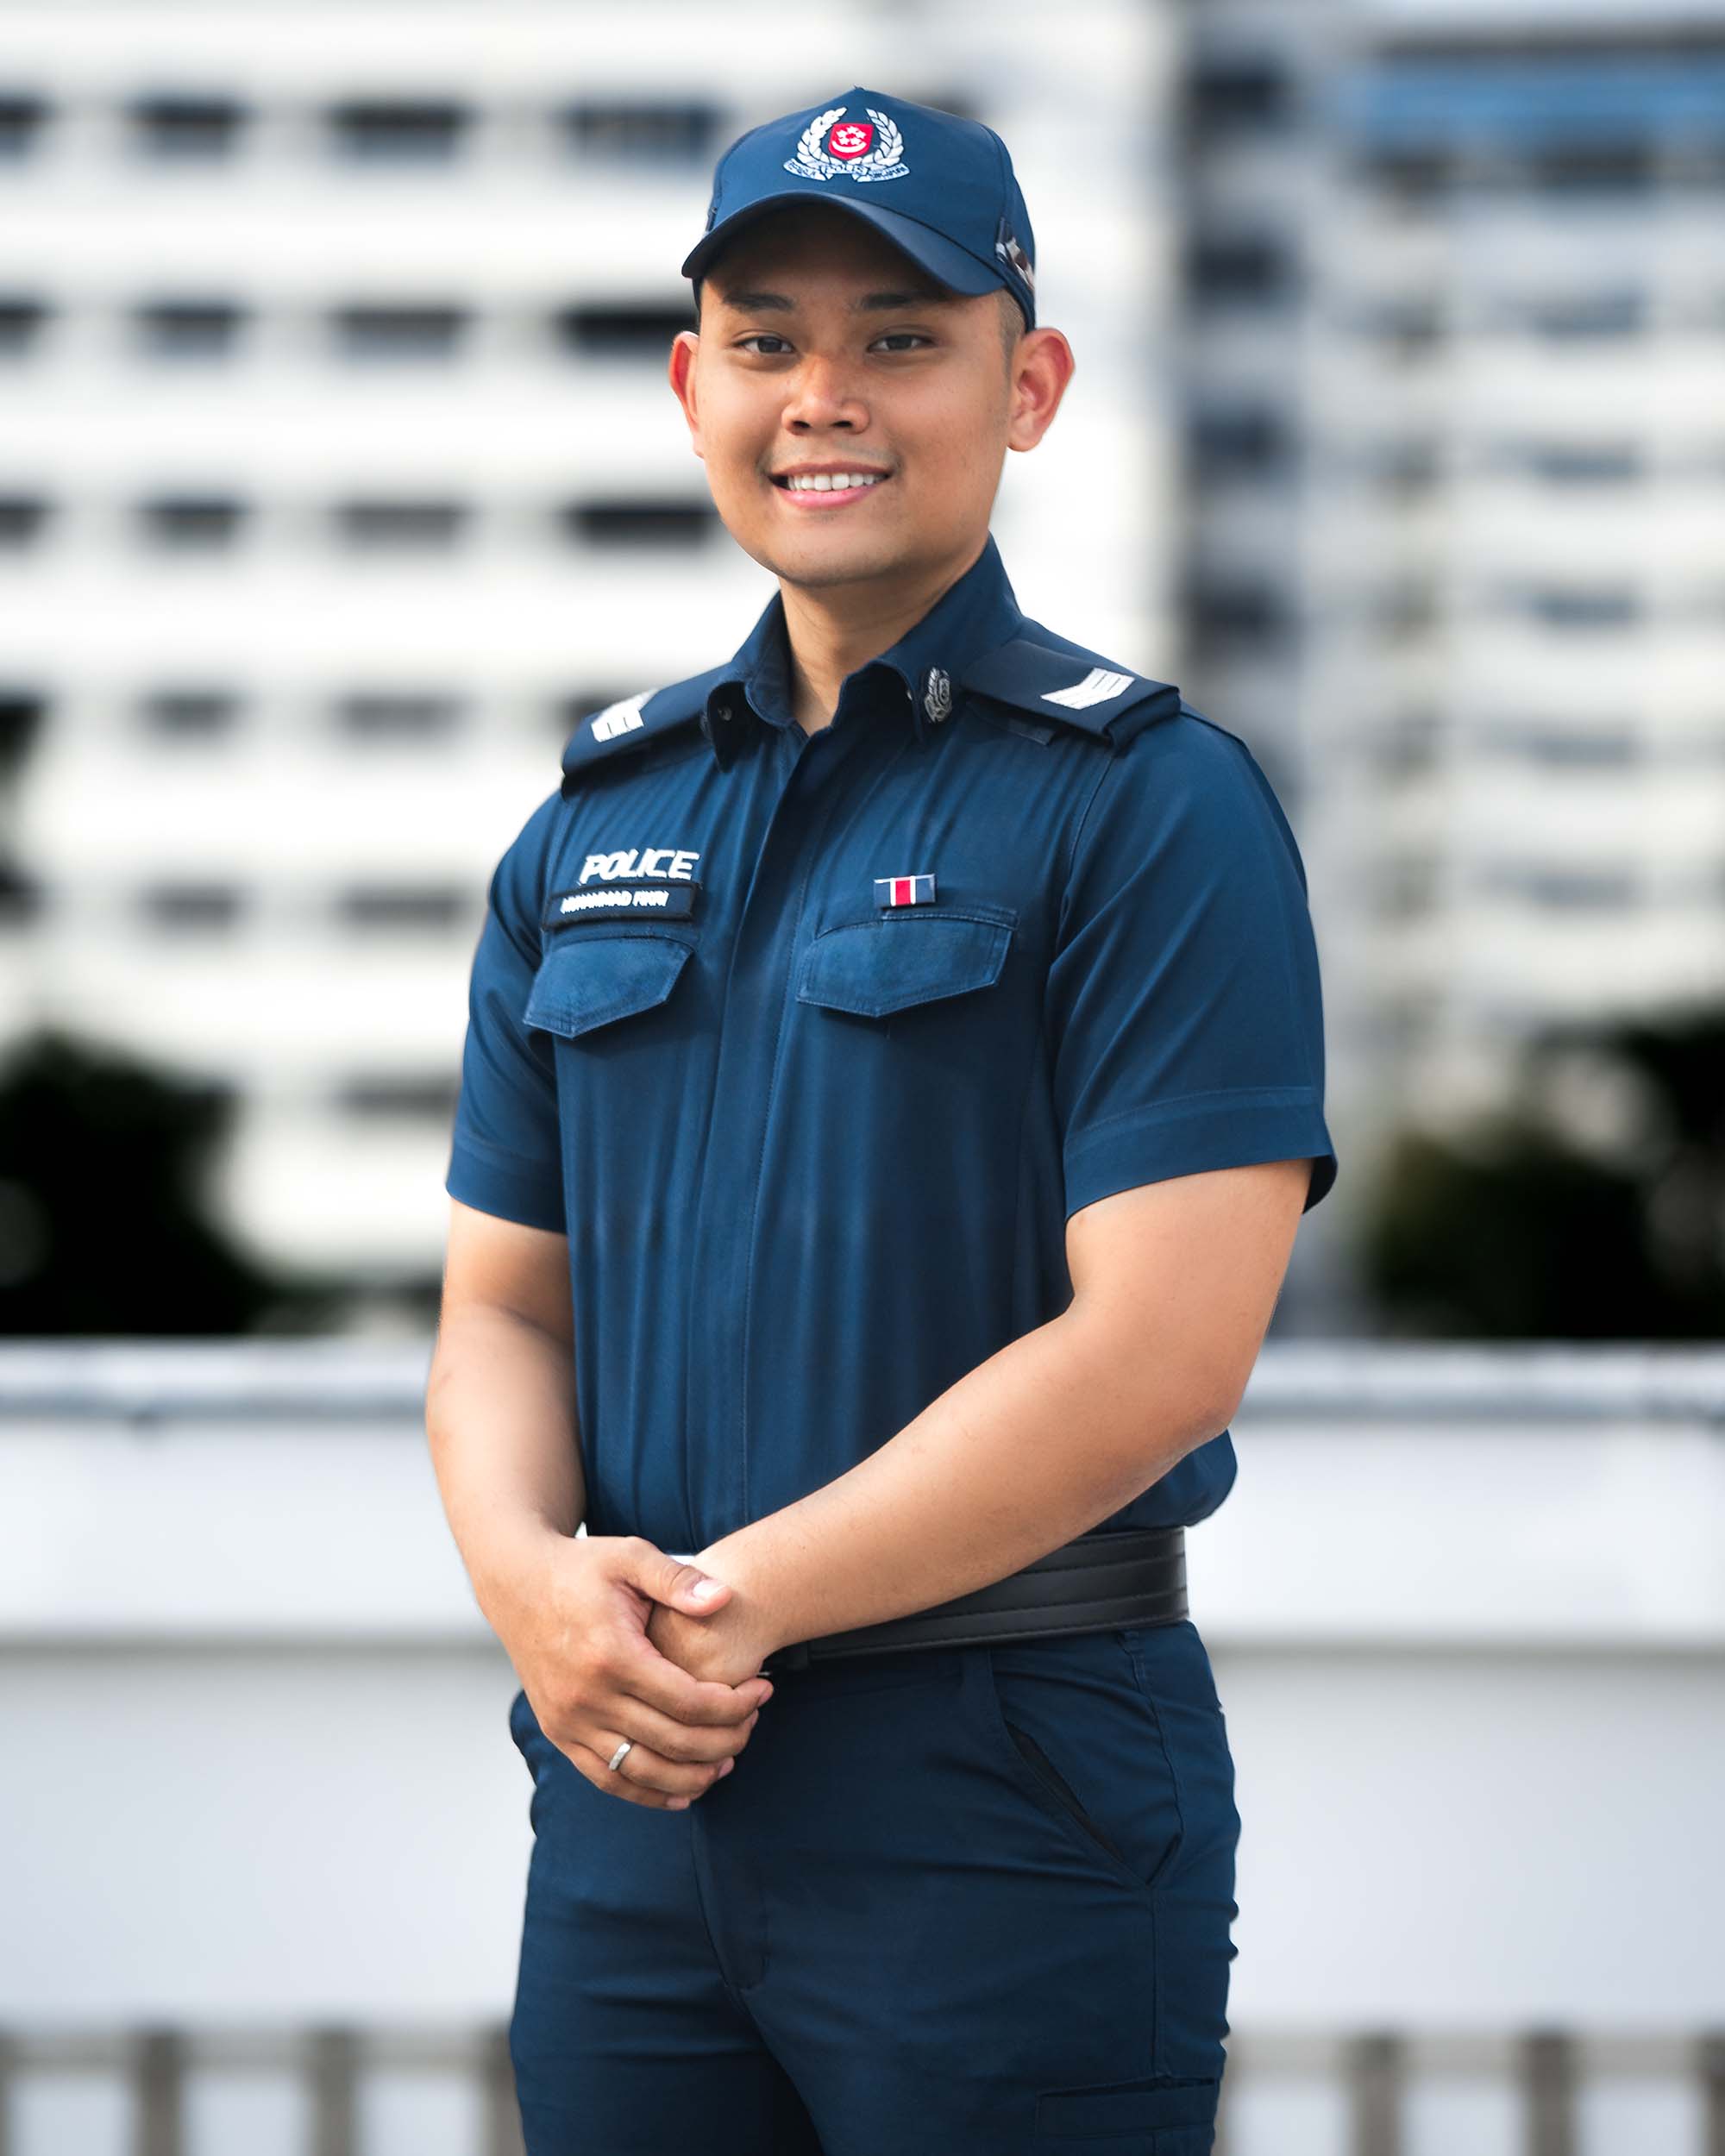 Sgt Fikri is currently a GRF officer with Hougang NPC.